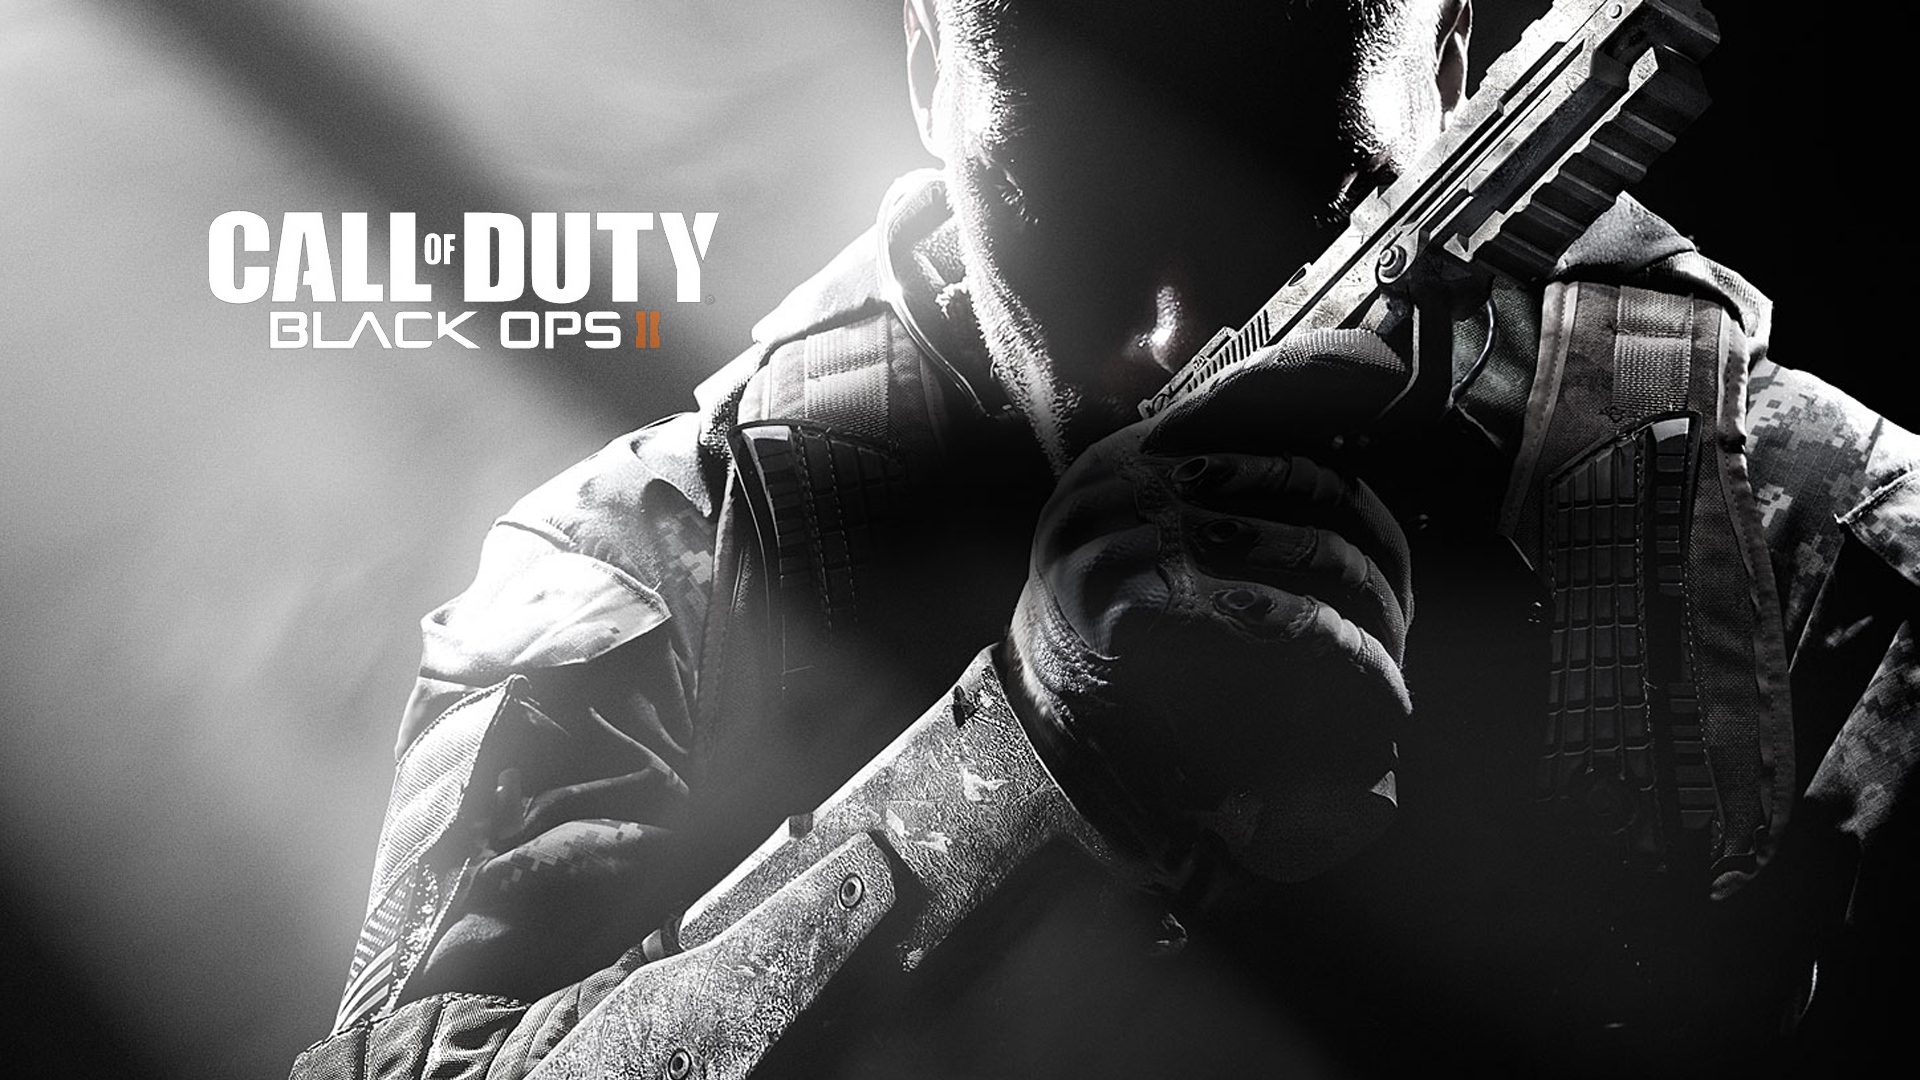 Black Ops 2 Iphone Wallpapers